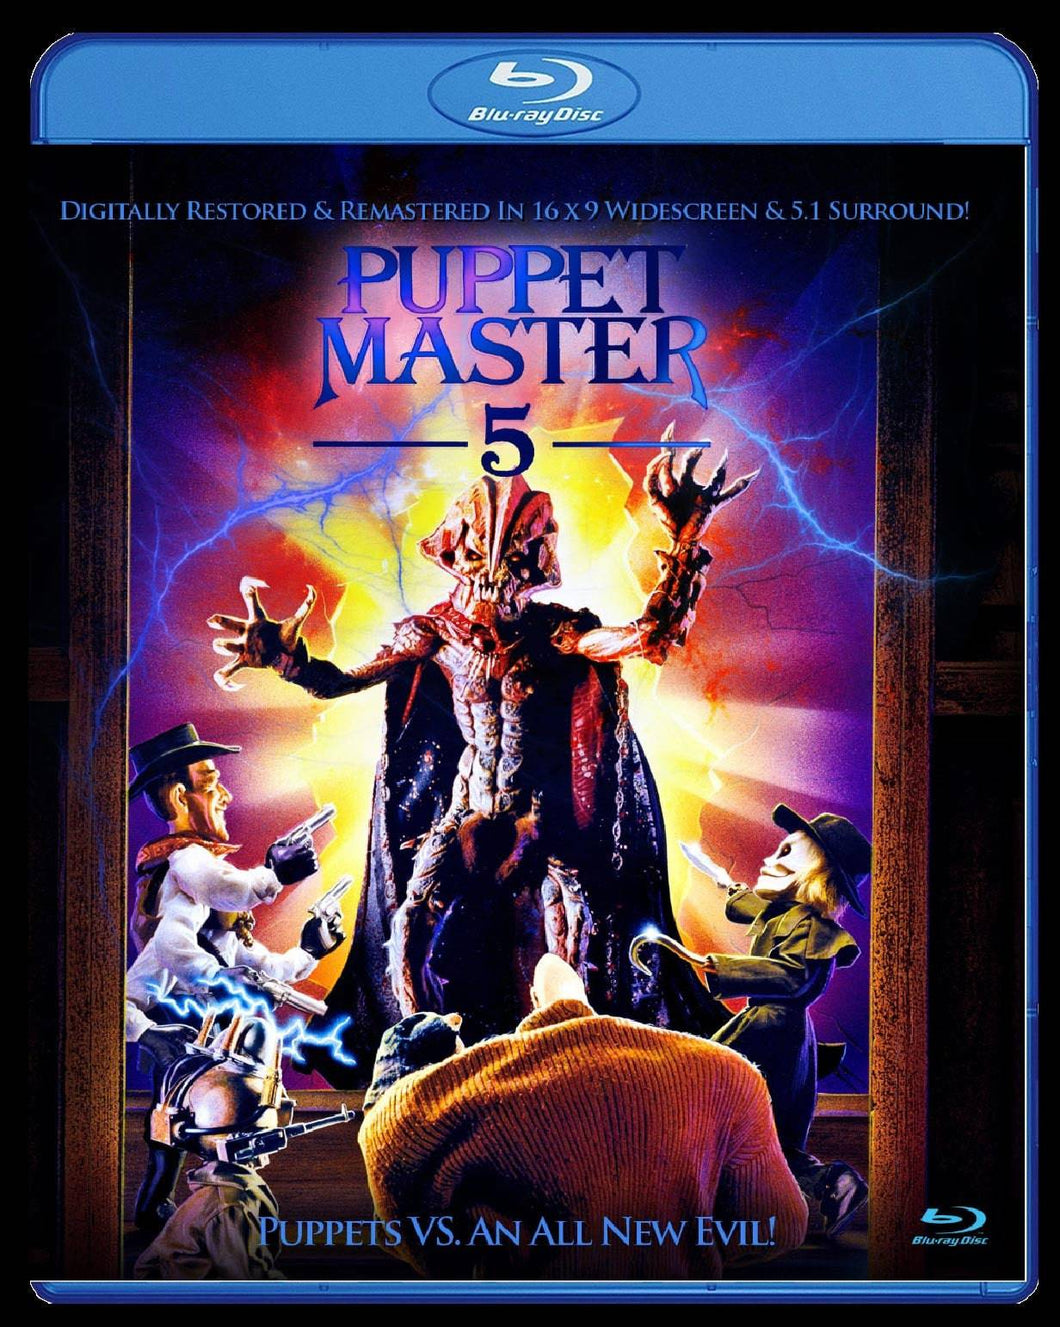 Puppet Master 5: Puppets vs An All New Evil Blu-ray